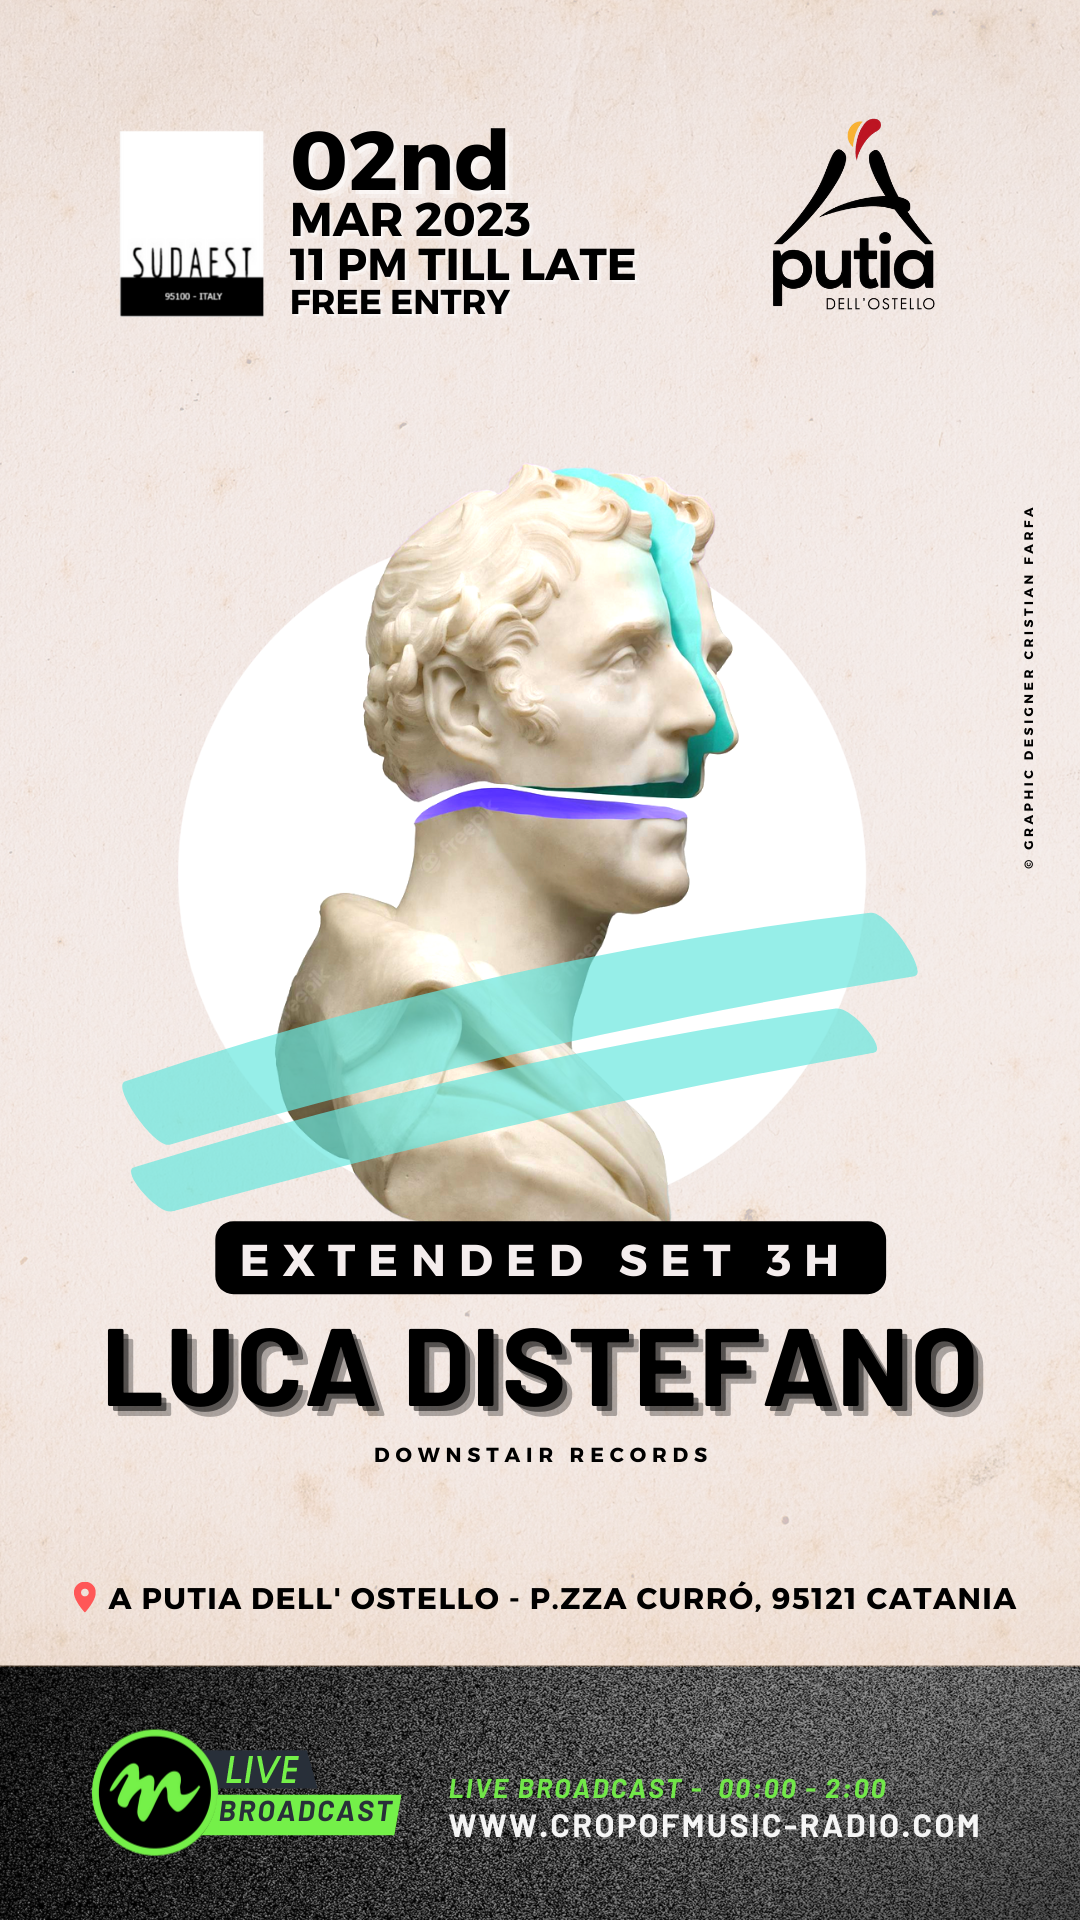 SUDAEST PRES: Luca Distefano 3 H EXTENDED SET at CAVE - Página trasera